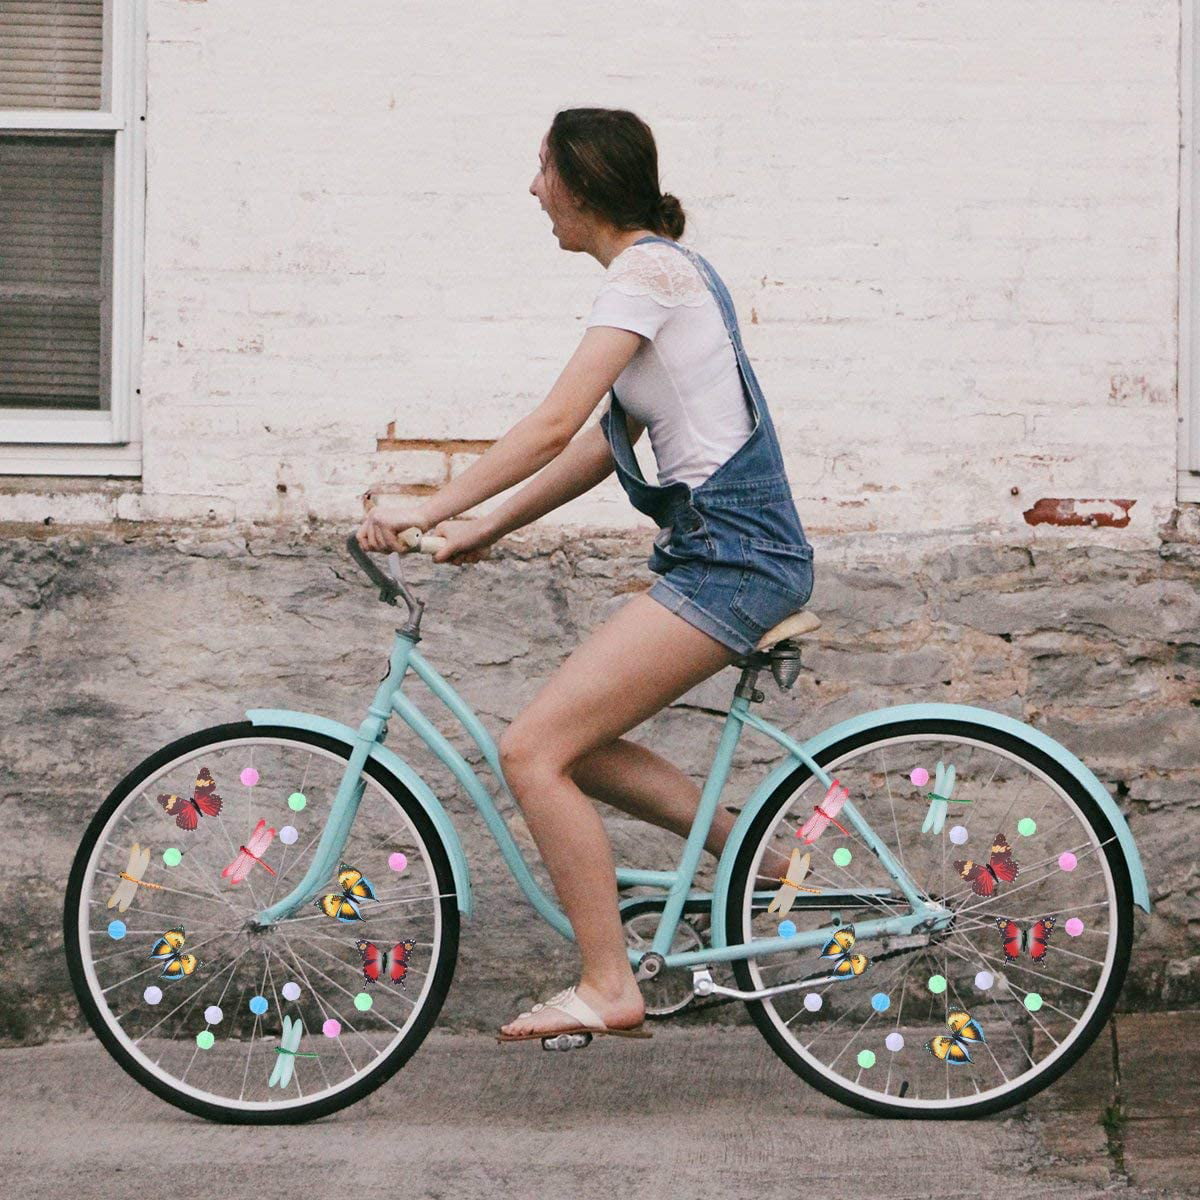 Wheely Bikes Bike Wheel Spokes Kit 36 Different Designs Colorful Bicycle Spokes Decorations Cute Biking Accessories for Kids Cool Cycling Gear Gift for Girls Spoke Beads Attachments